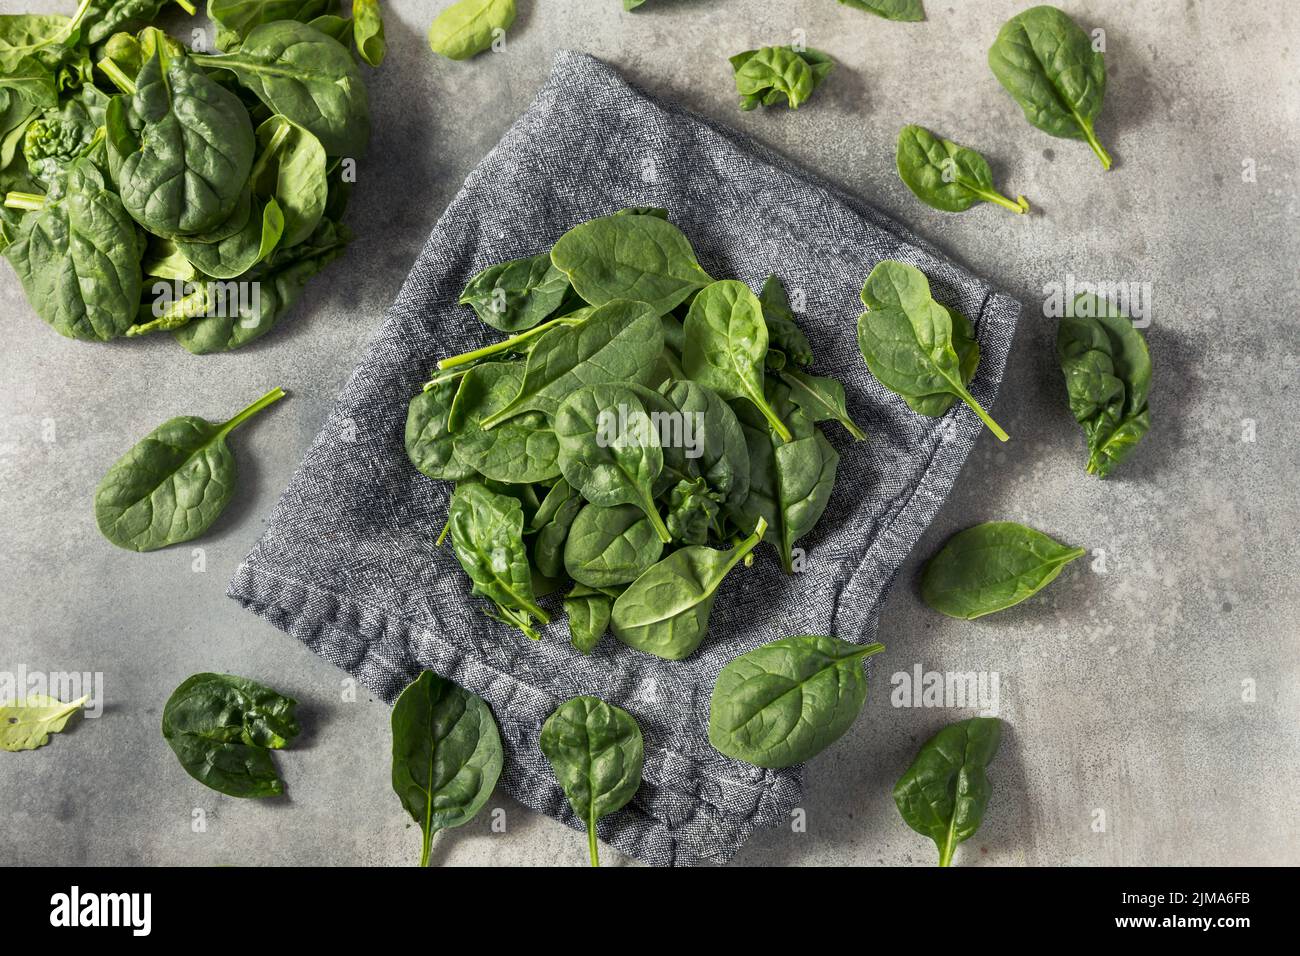 Raw Green Organic Baby Spinach Ready to Cook Stock Photo